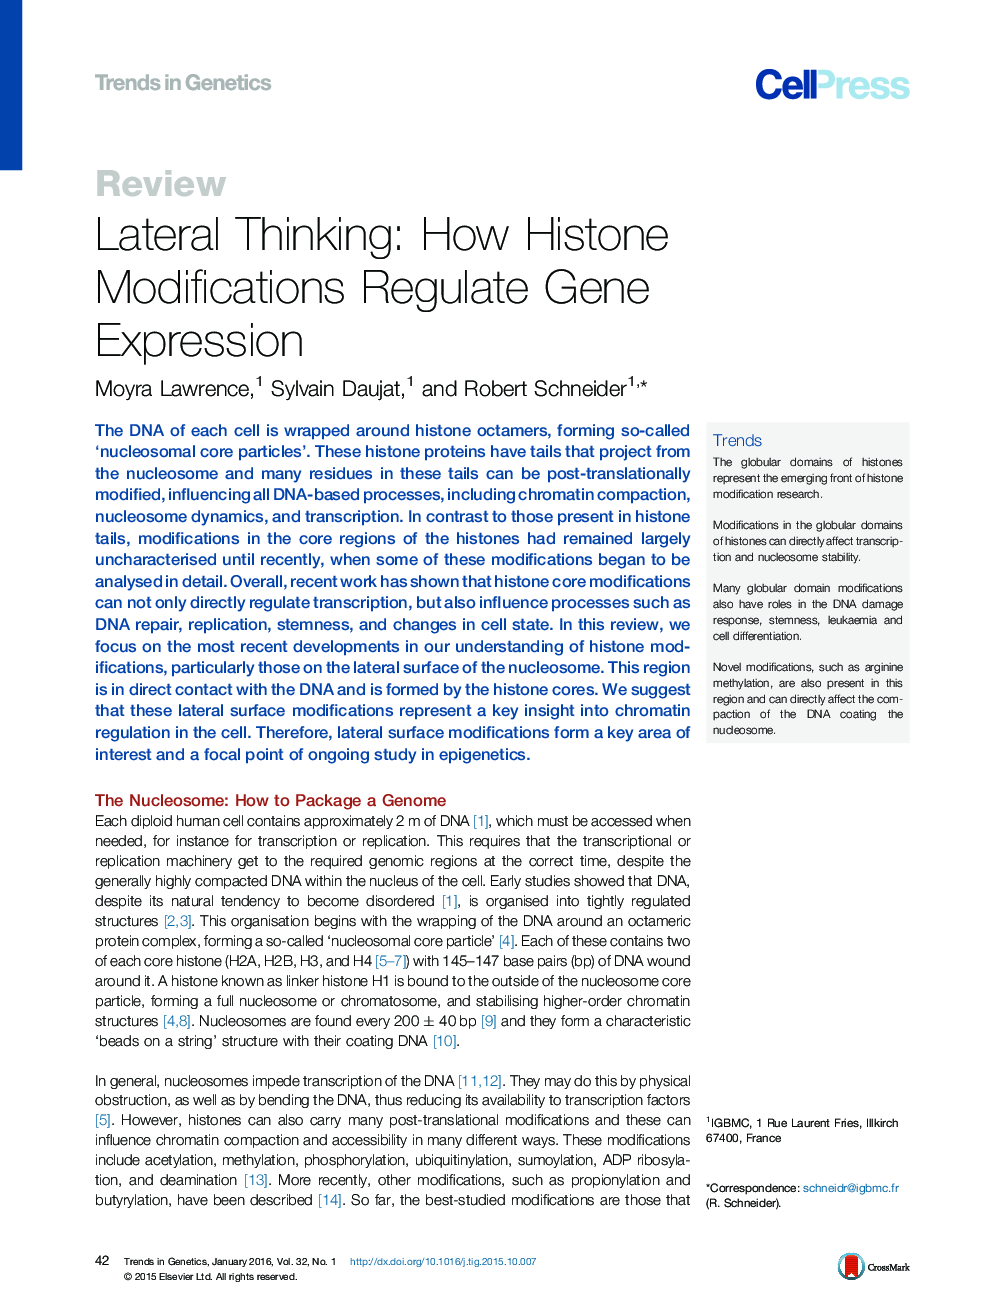 Lateral Thinking: How Histone Modifications Regulate Gene Expression